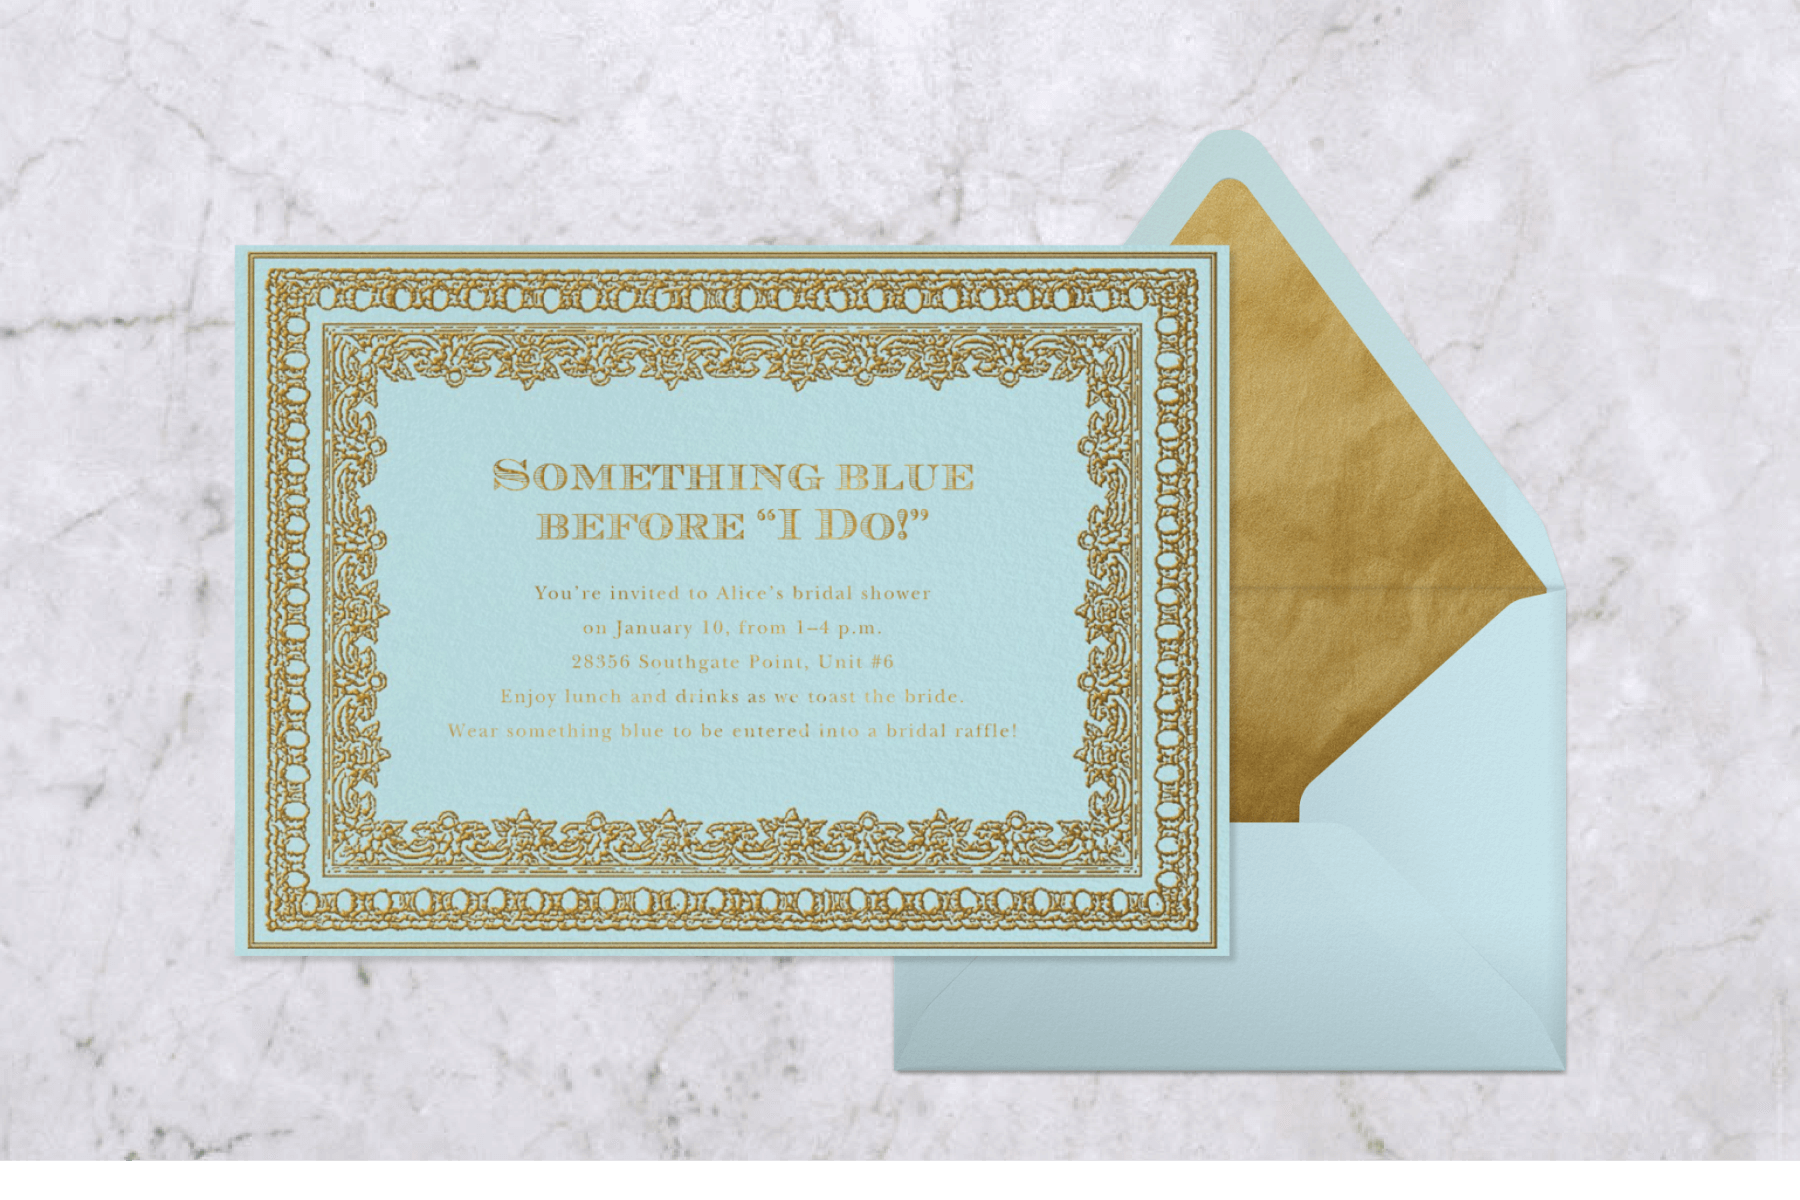 A light blue invitation with an ornate gold double border and matching envelope.